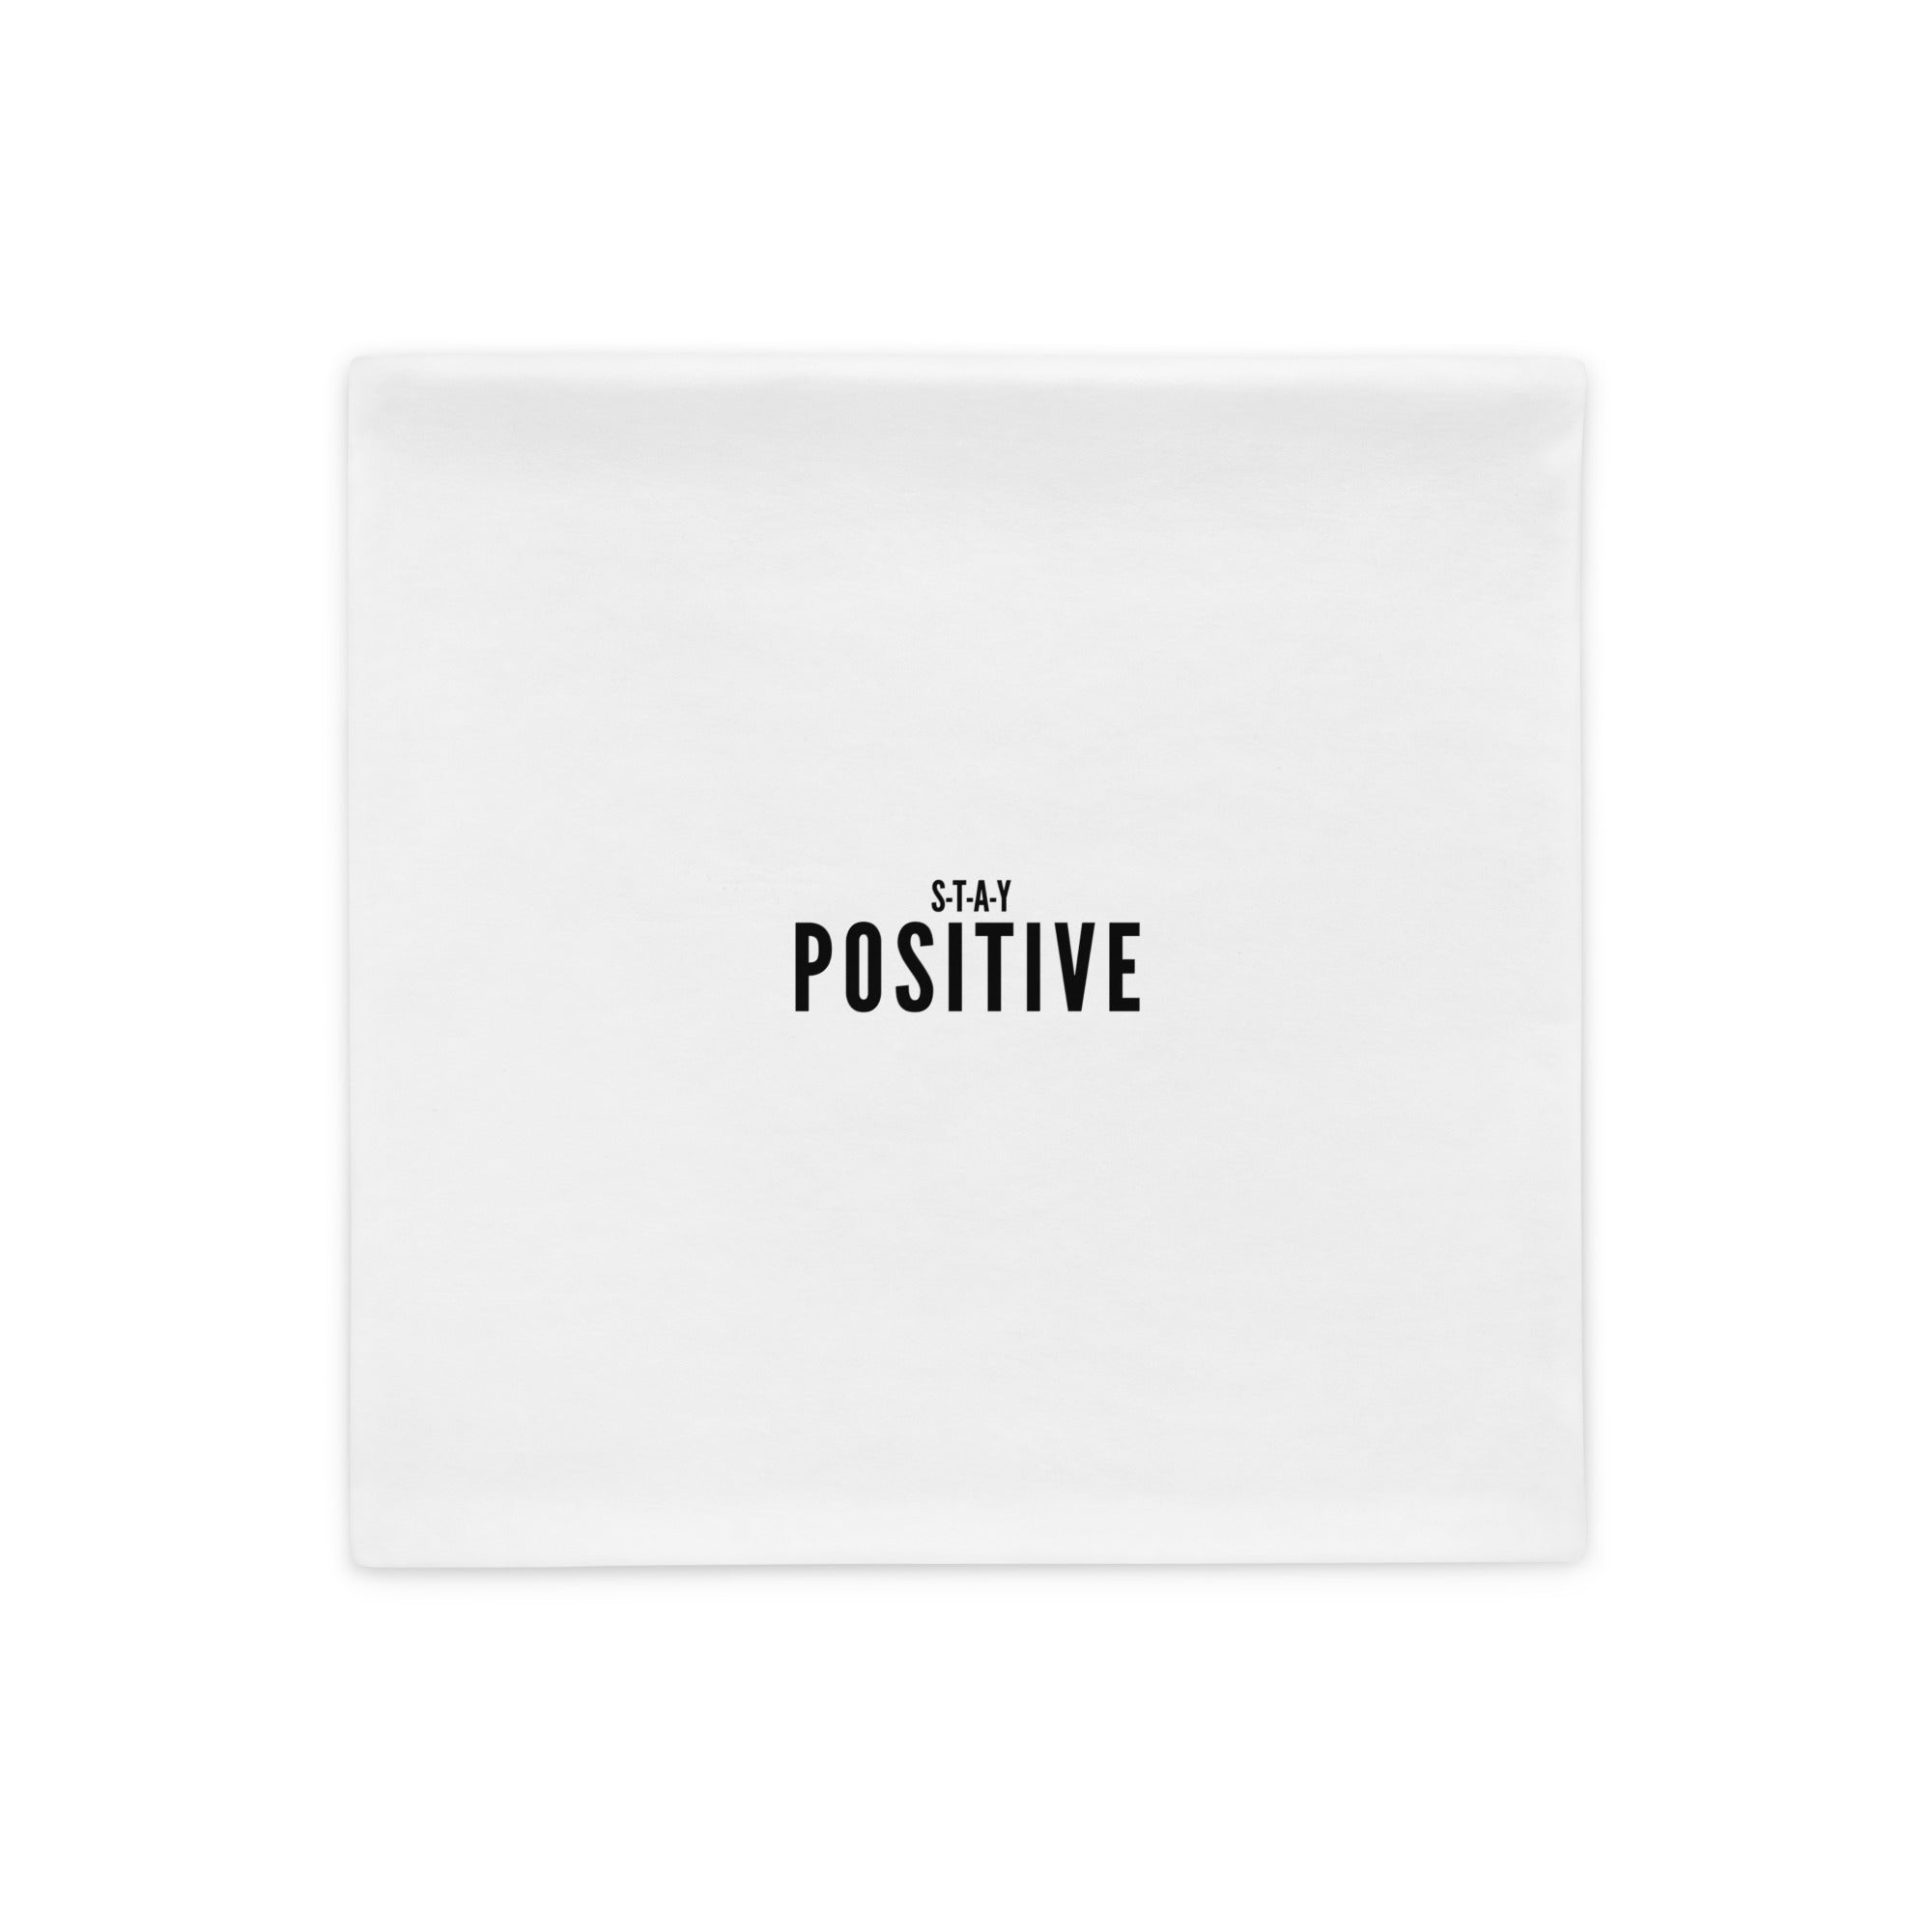 Stay Positive - Pillow Case